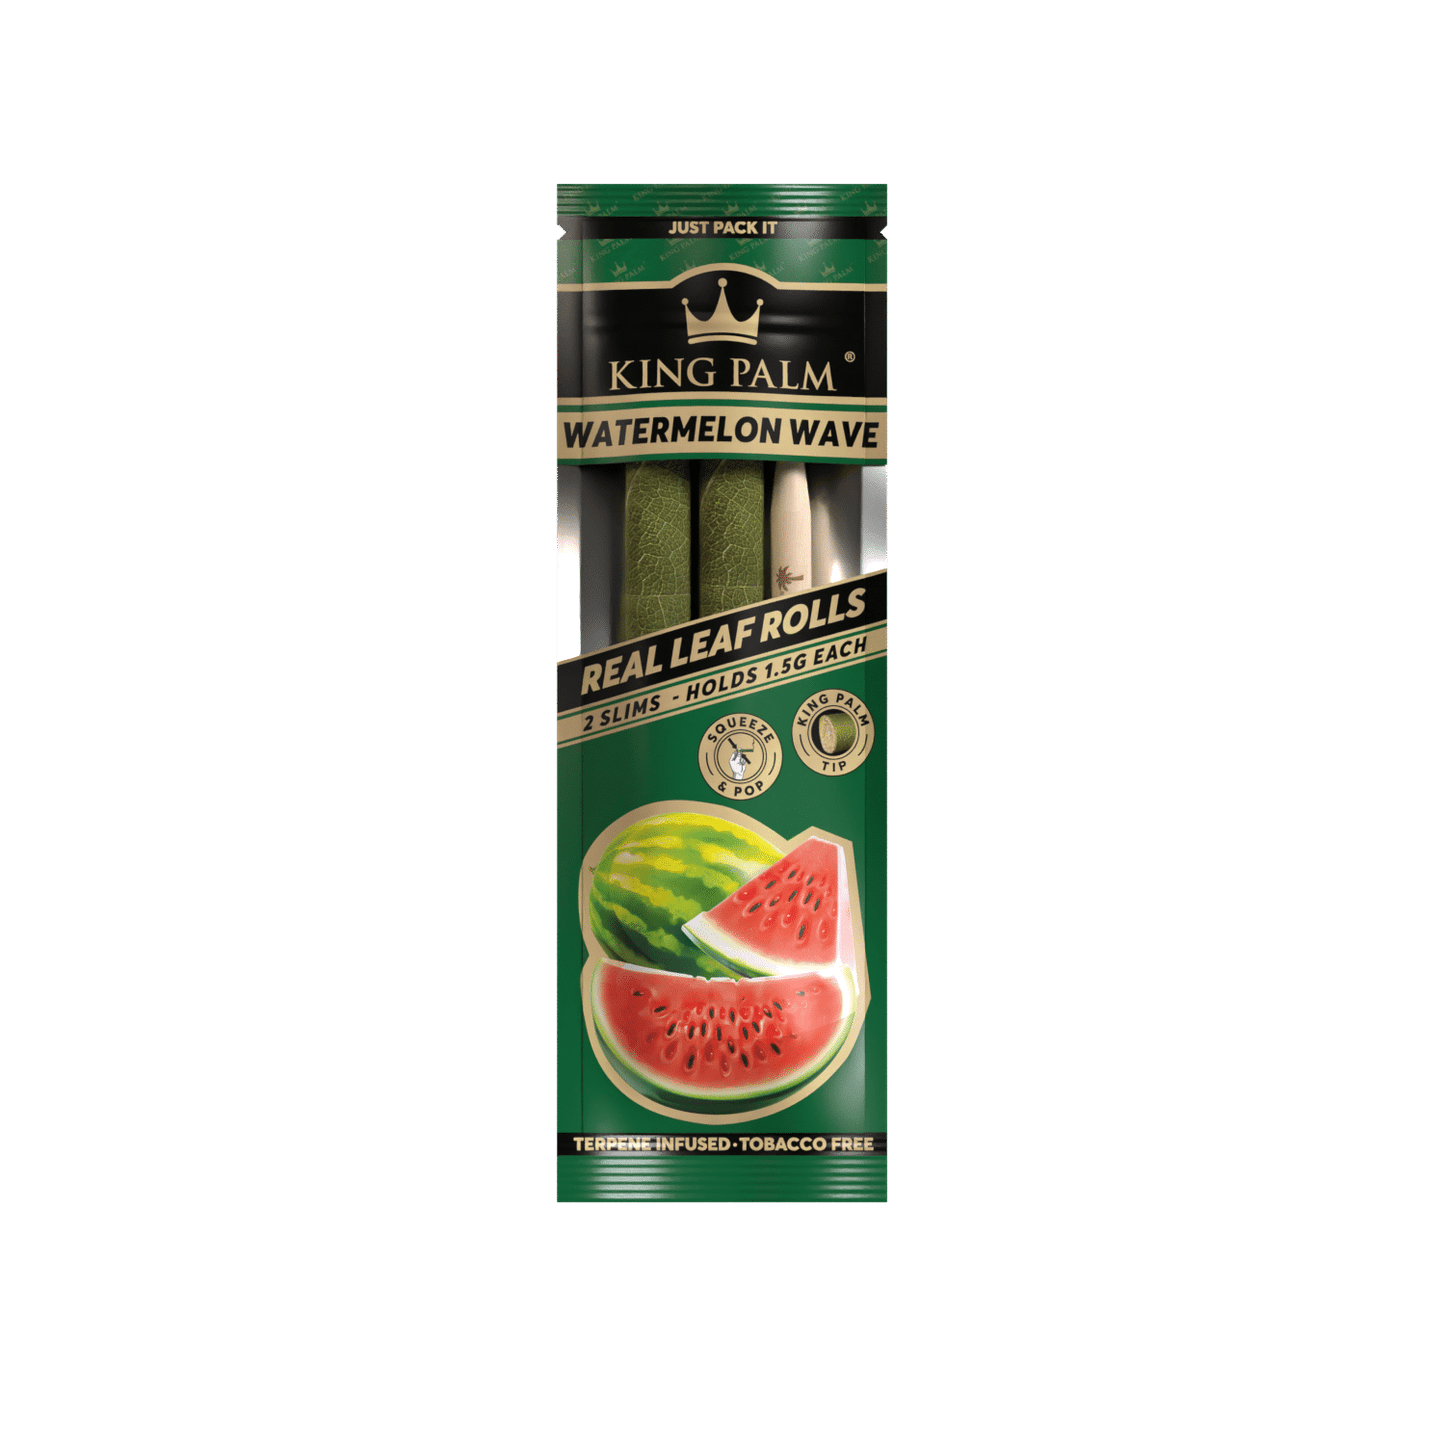 King Palm - Flavored Rolls, Slims (1.5g), Pack of 2